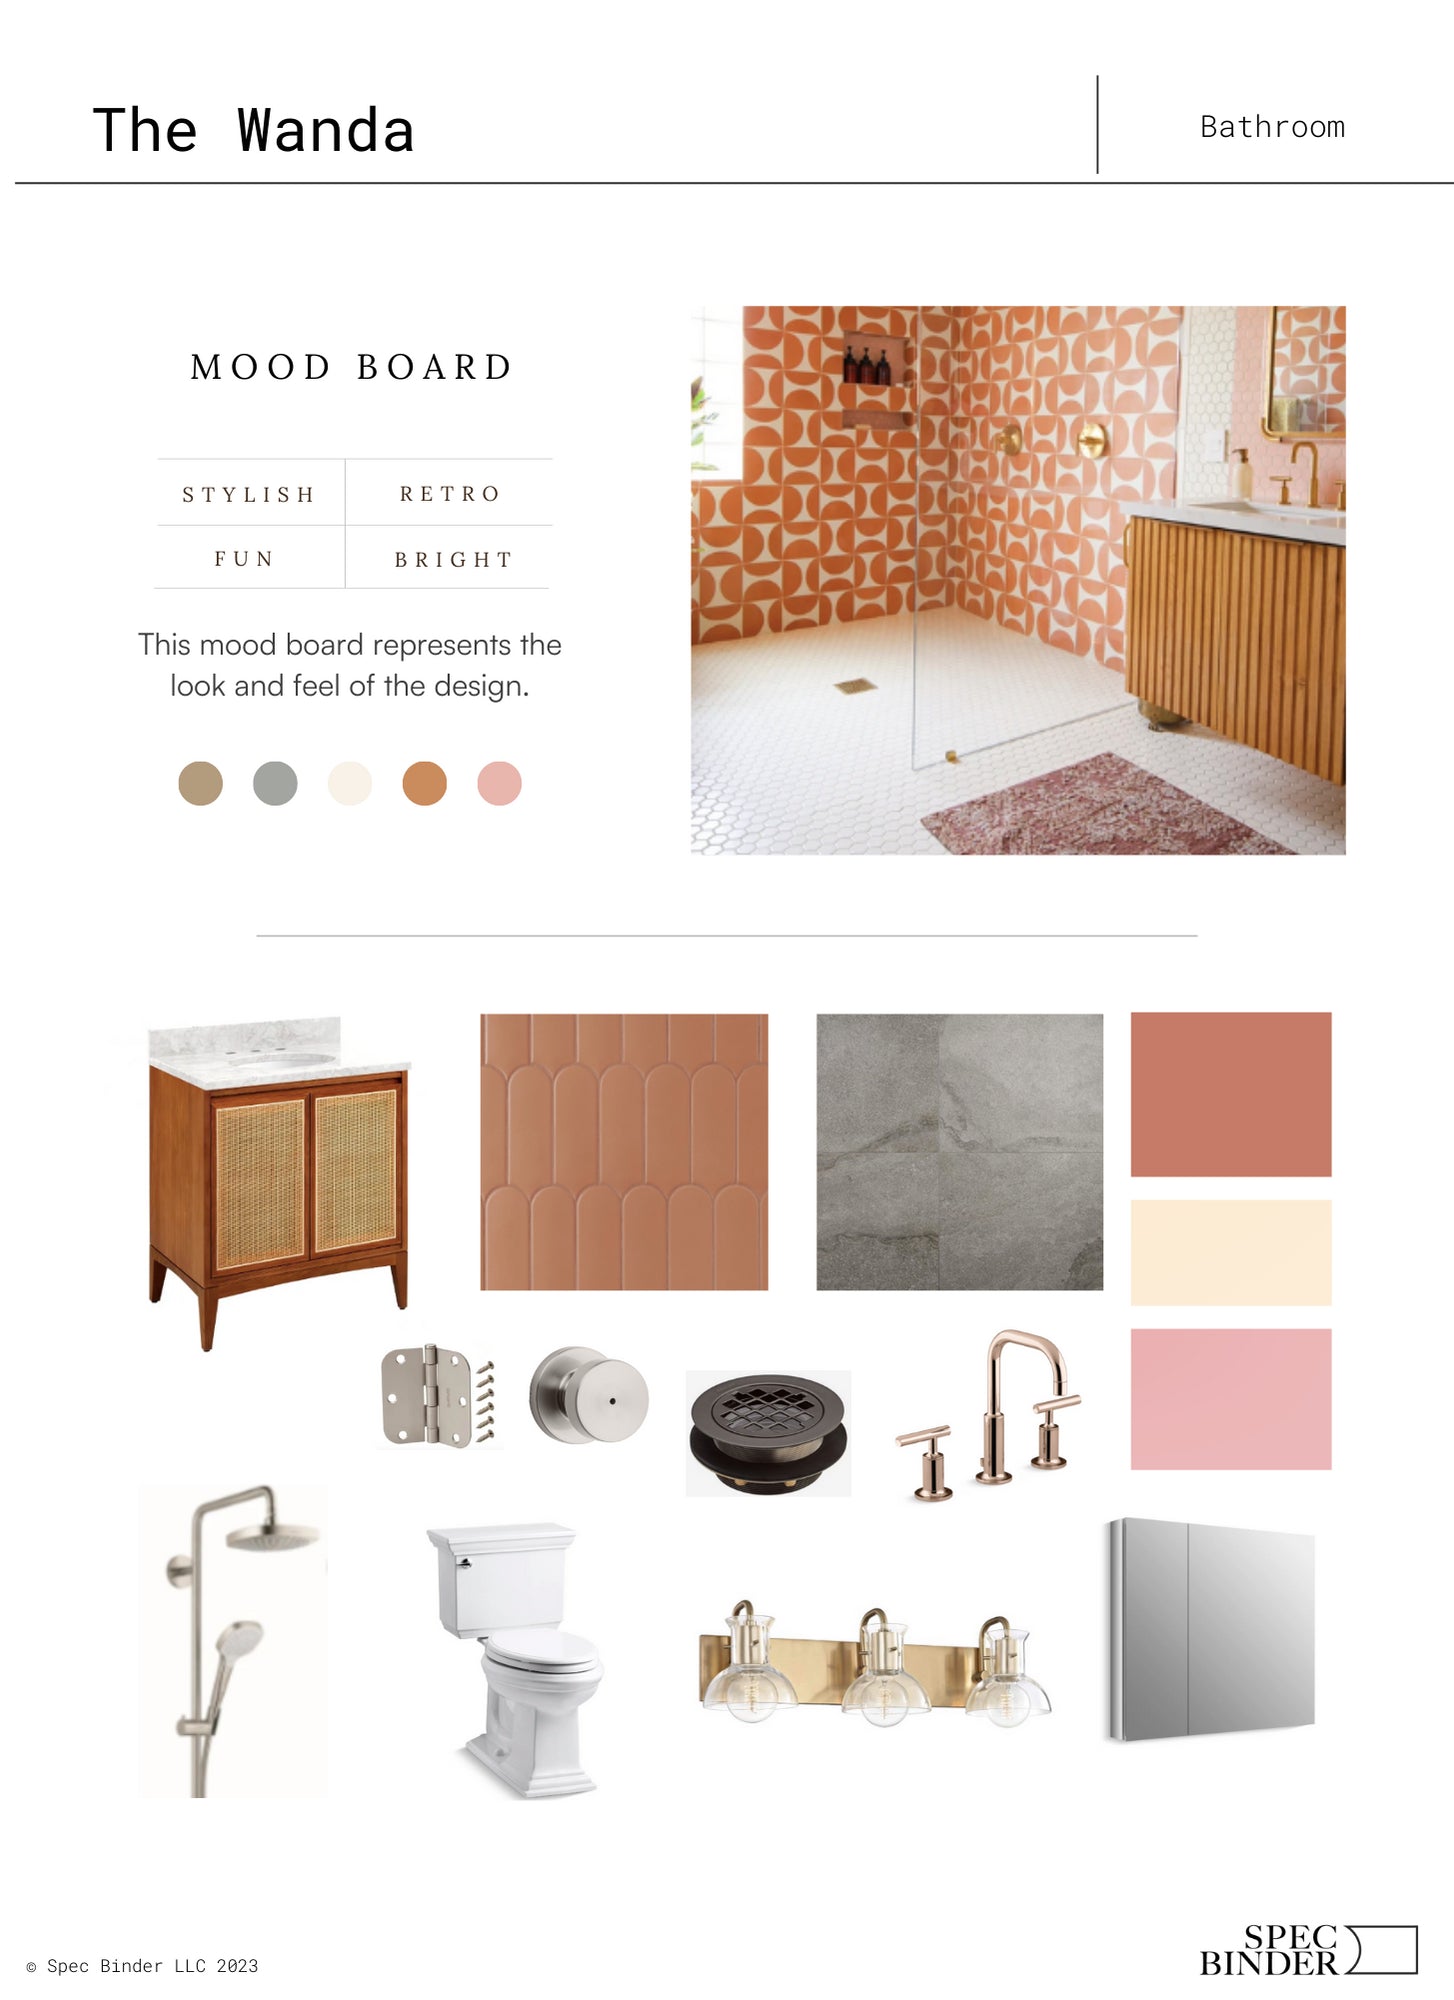 Moodboard image showing the look and feel of the design, featuring textures, patterns, colors, and finishing materials